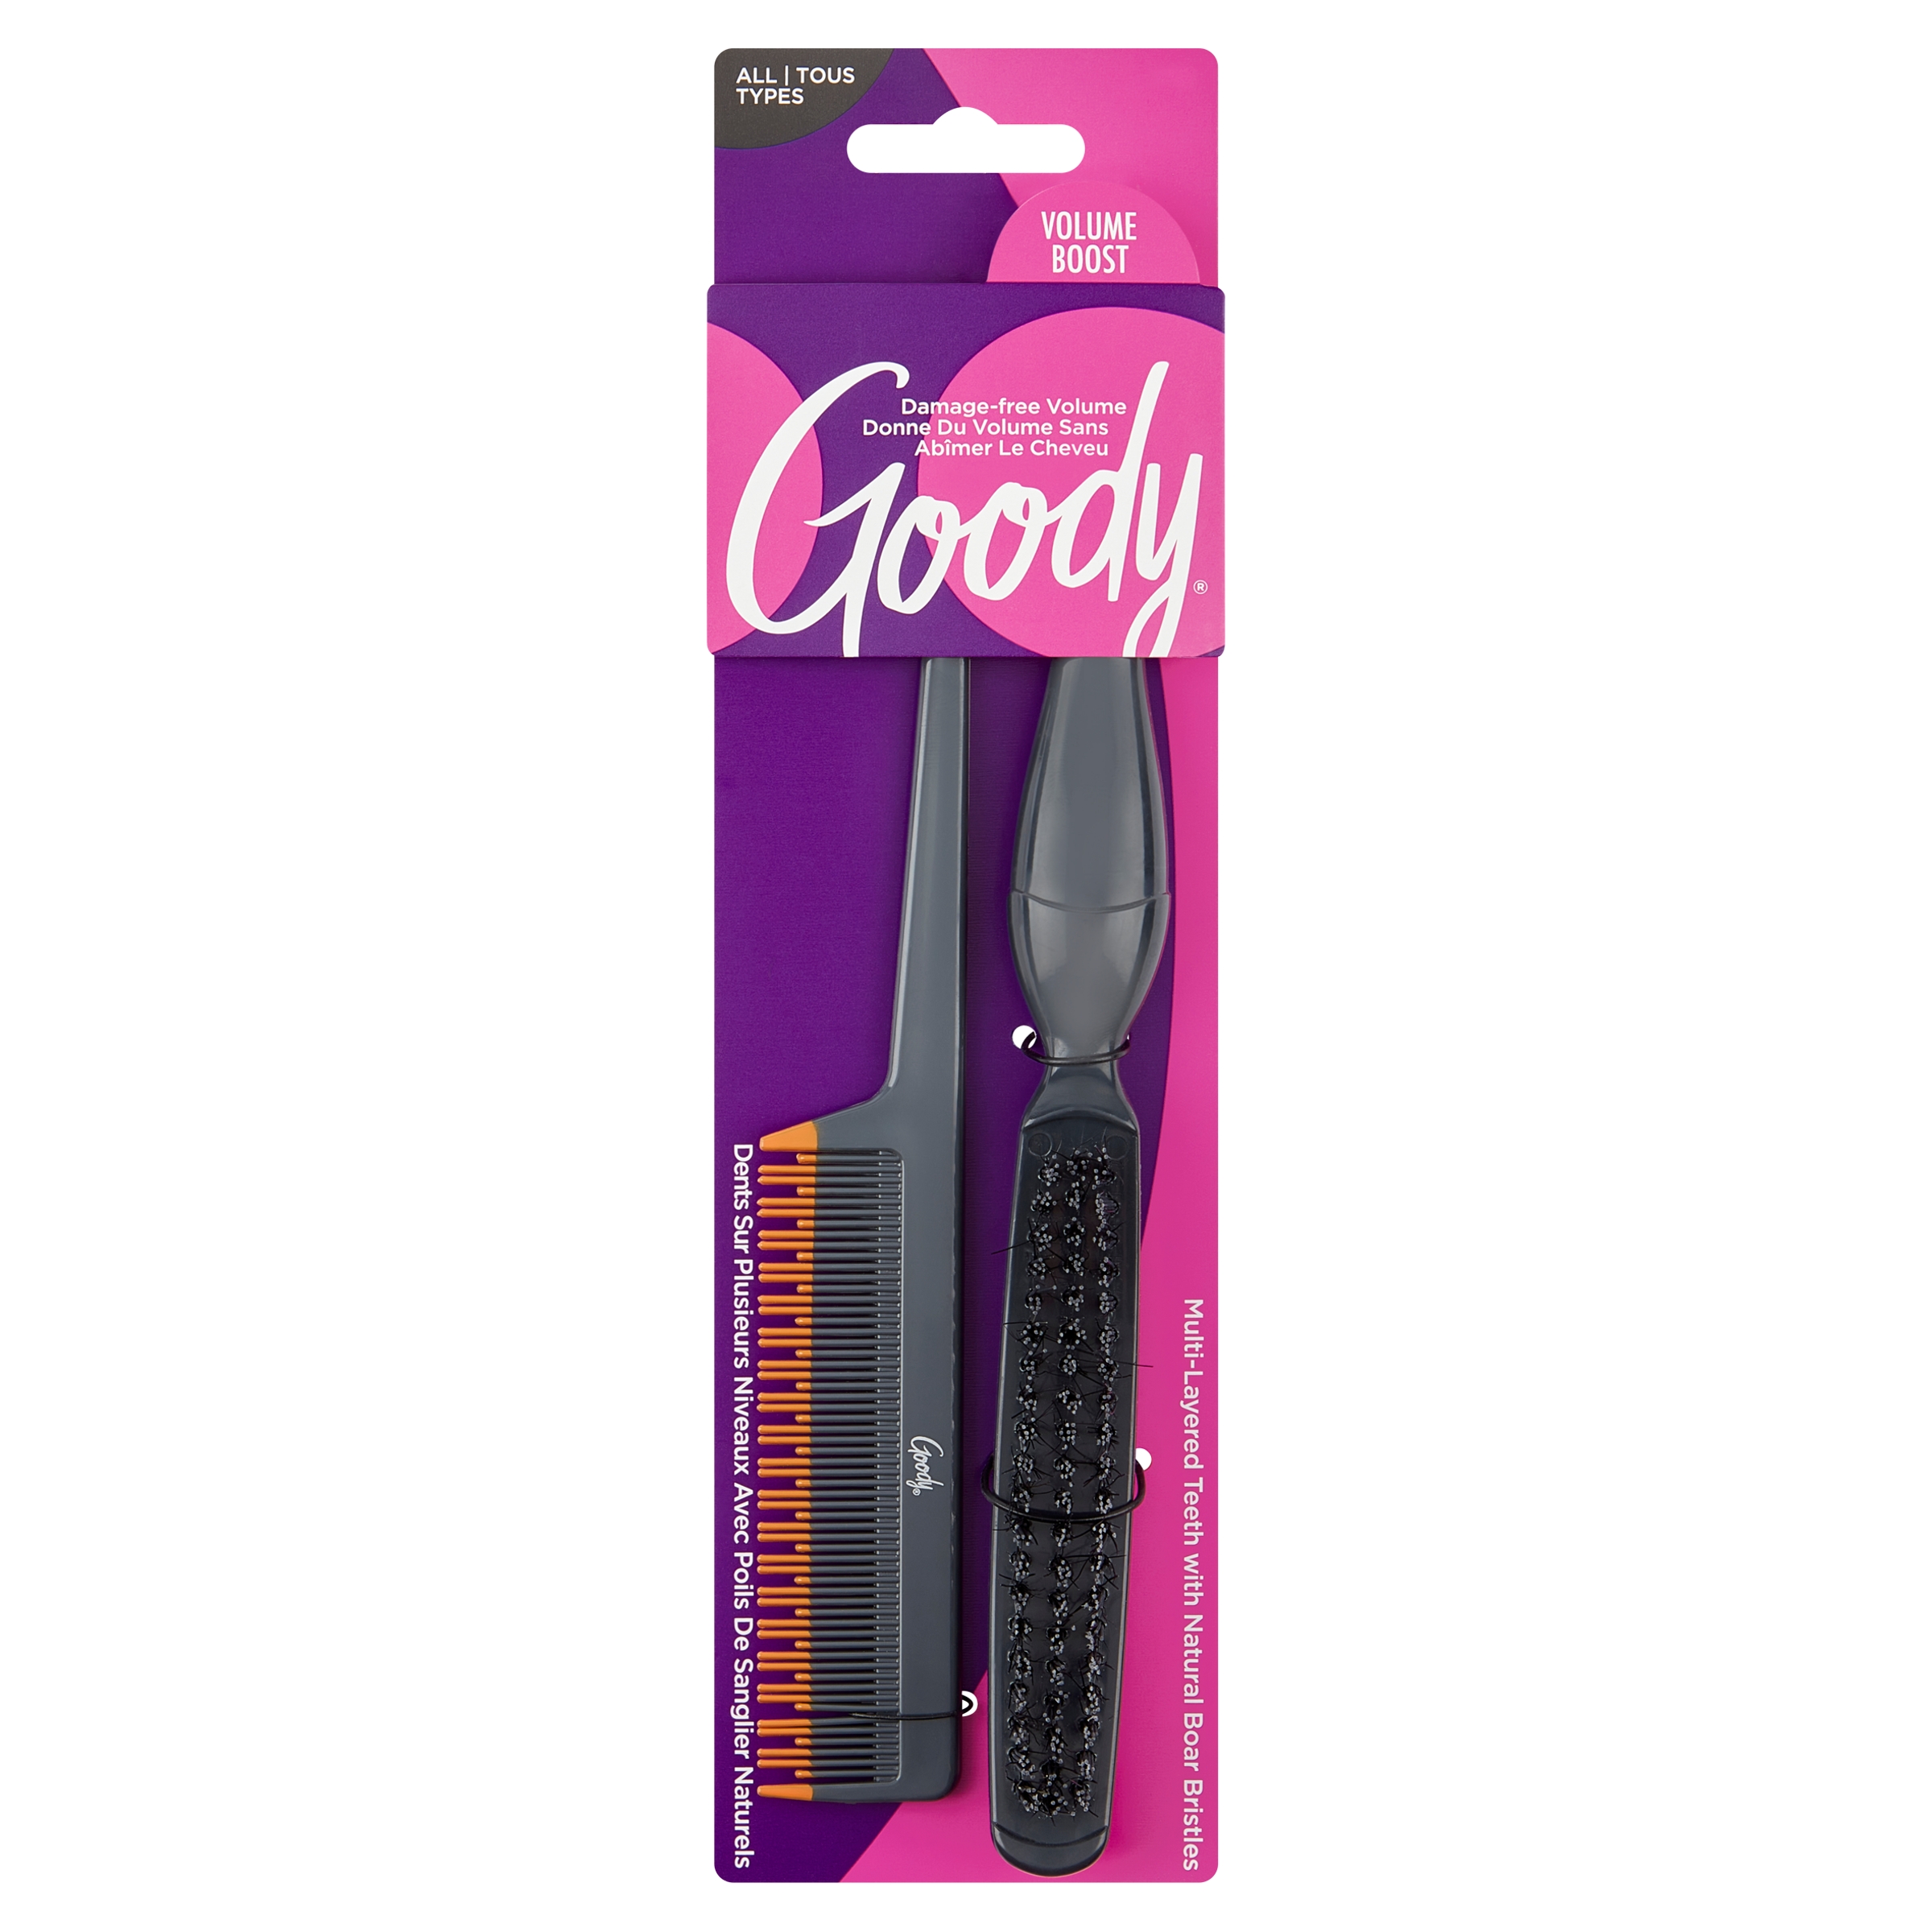 Goody® Volume Boost Teasing Comb and Boar Bristle Brush Kit, 2 CT - image 1 of 7